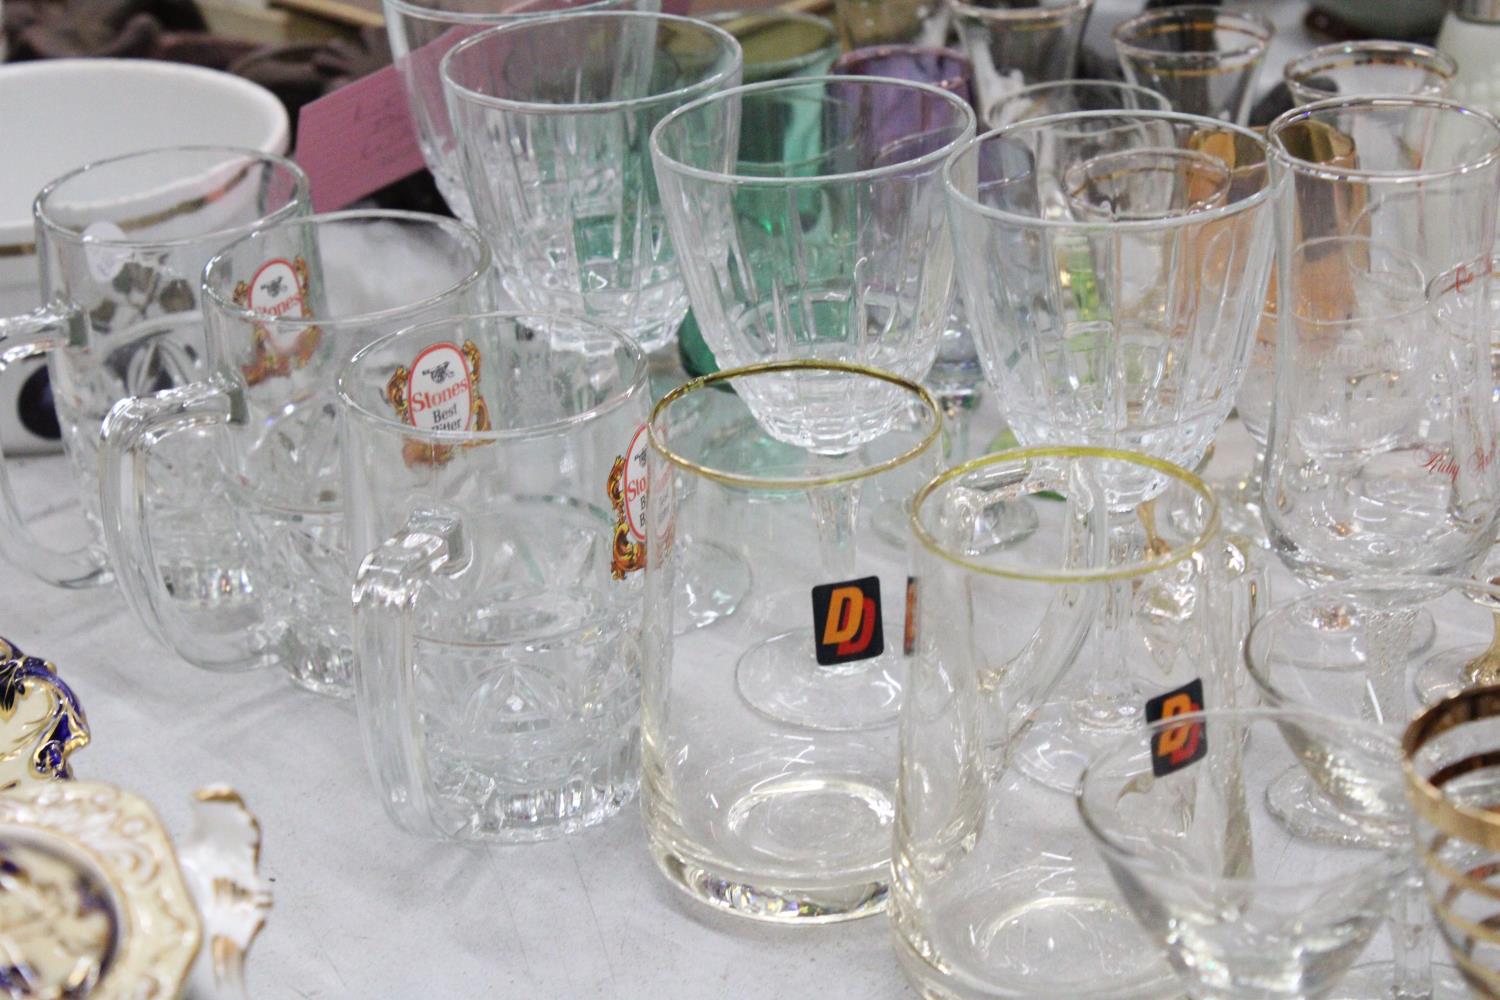 A QUANTITY OF GLASSWARE TO INCLUDE SHOT GLASSES, BEER GLASSES, WINE GLASSES, SHERRY GLASSES ETC - Image 2 of 6